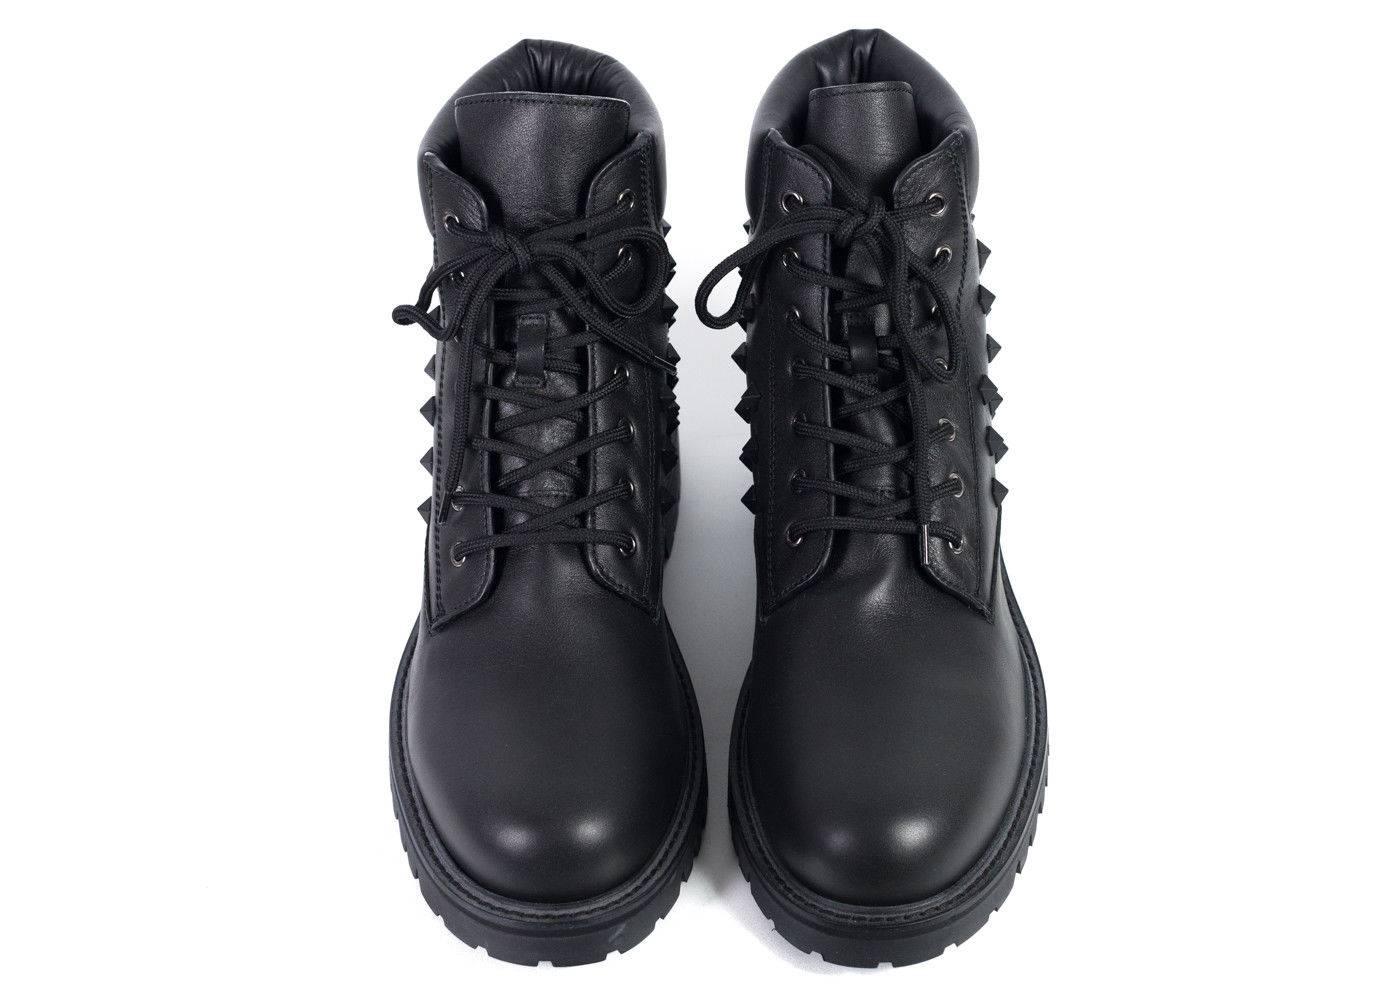 Brand New Valentino Men's Combat Boots
Original Box & Dust Bag Included
Retails in Stores & Online for $1345
Size IT42.5 / US9.5 Fits True to Size

Valentino's rendition of a classic black combat boot with their house's signature rocketed